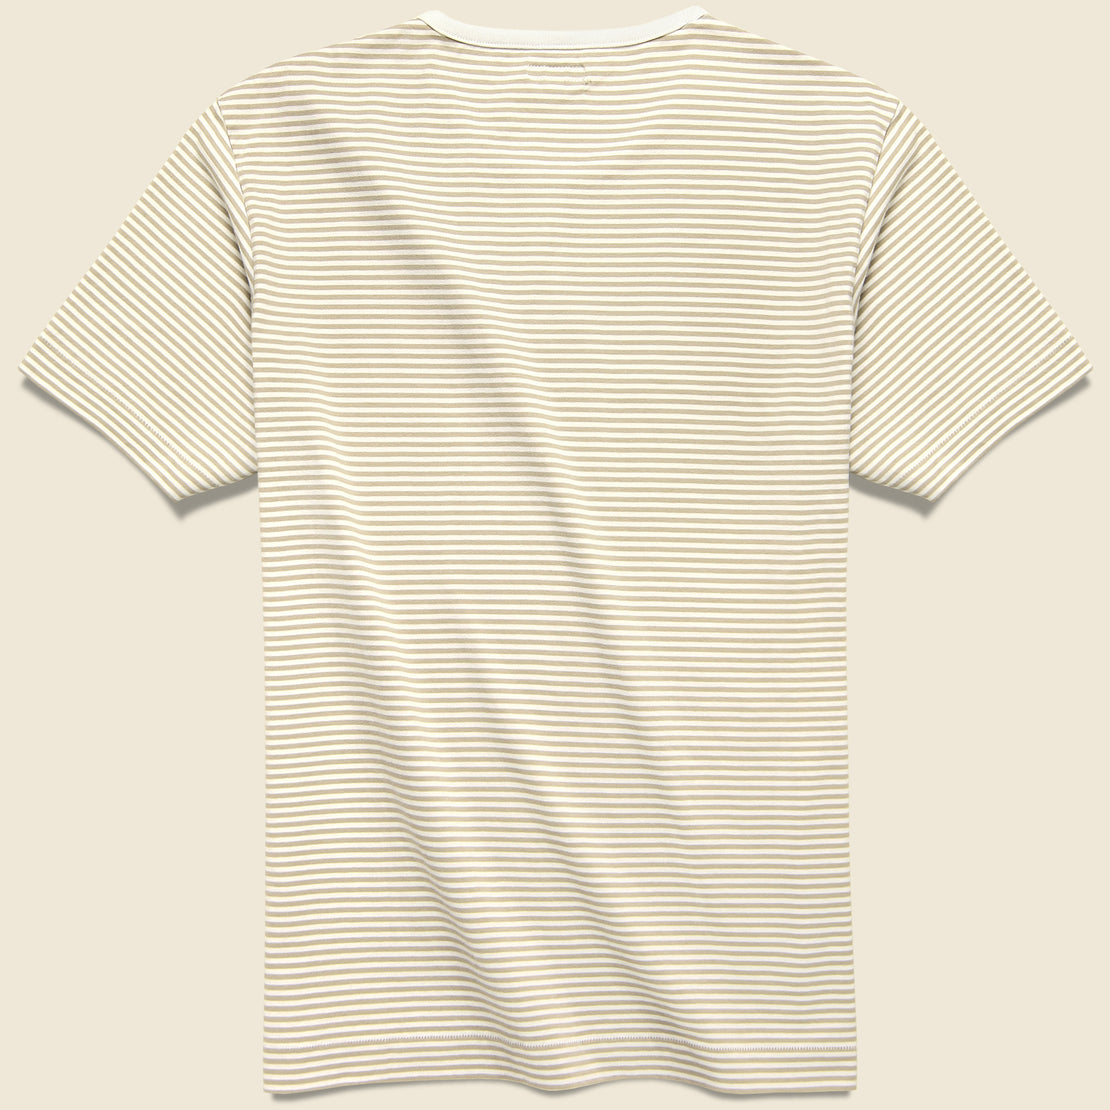 Mod Striped Tee - White/Tan - Knickerbocker - STAG Provisions - Tops - S/S Tee